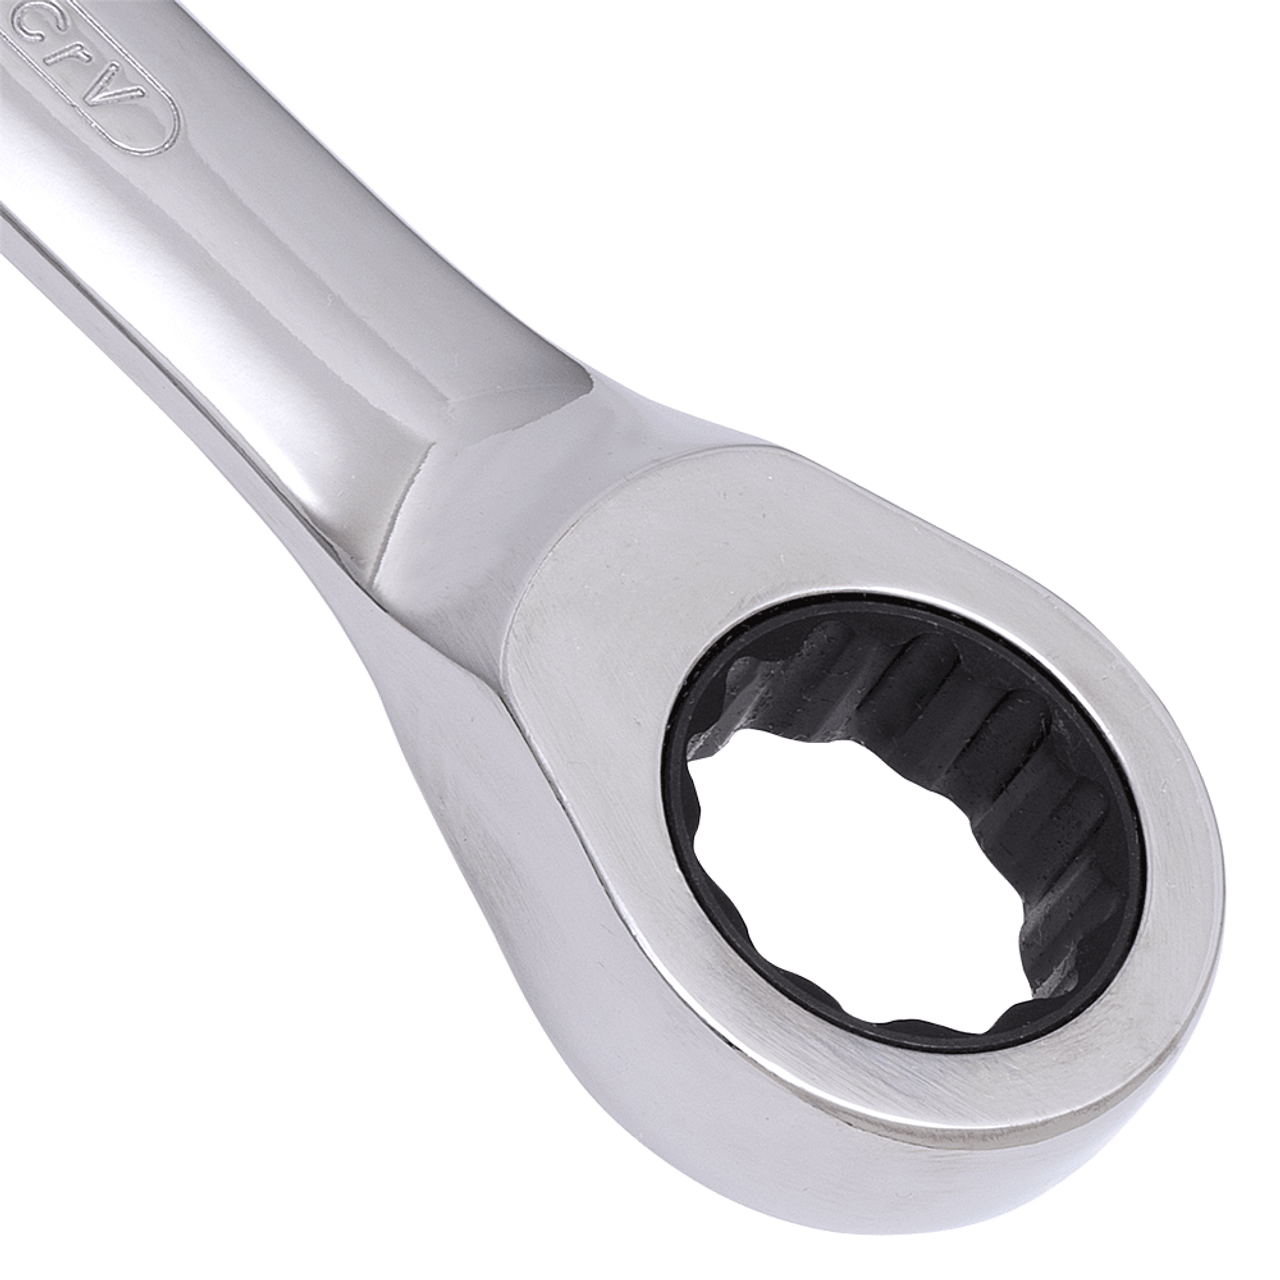 46mm Ratcheting Combination Wrench  701291